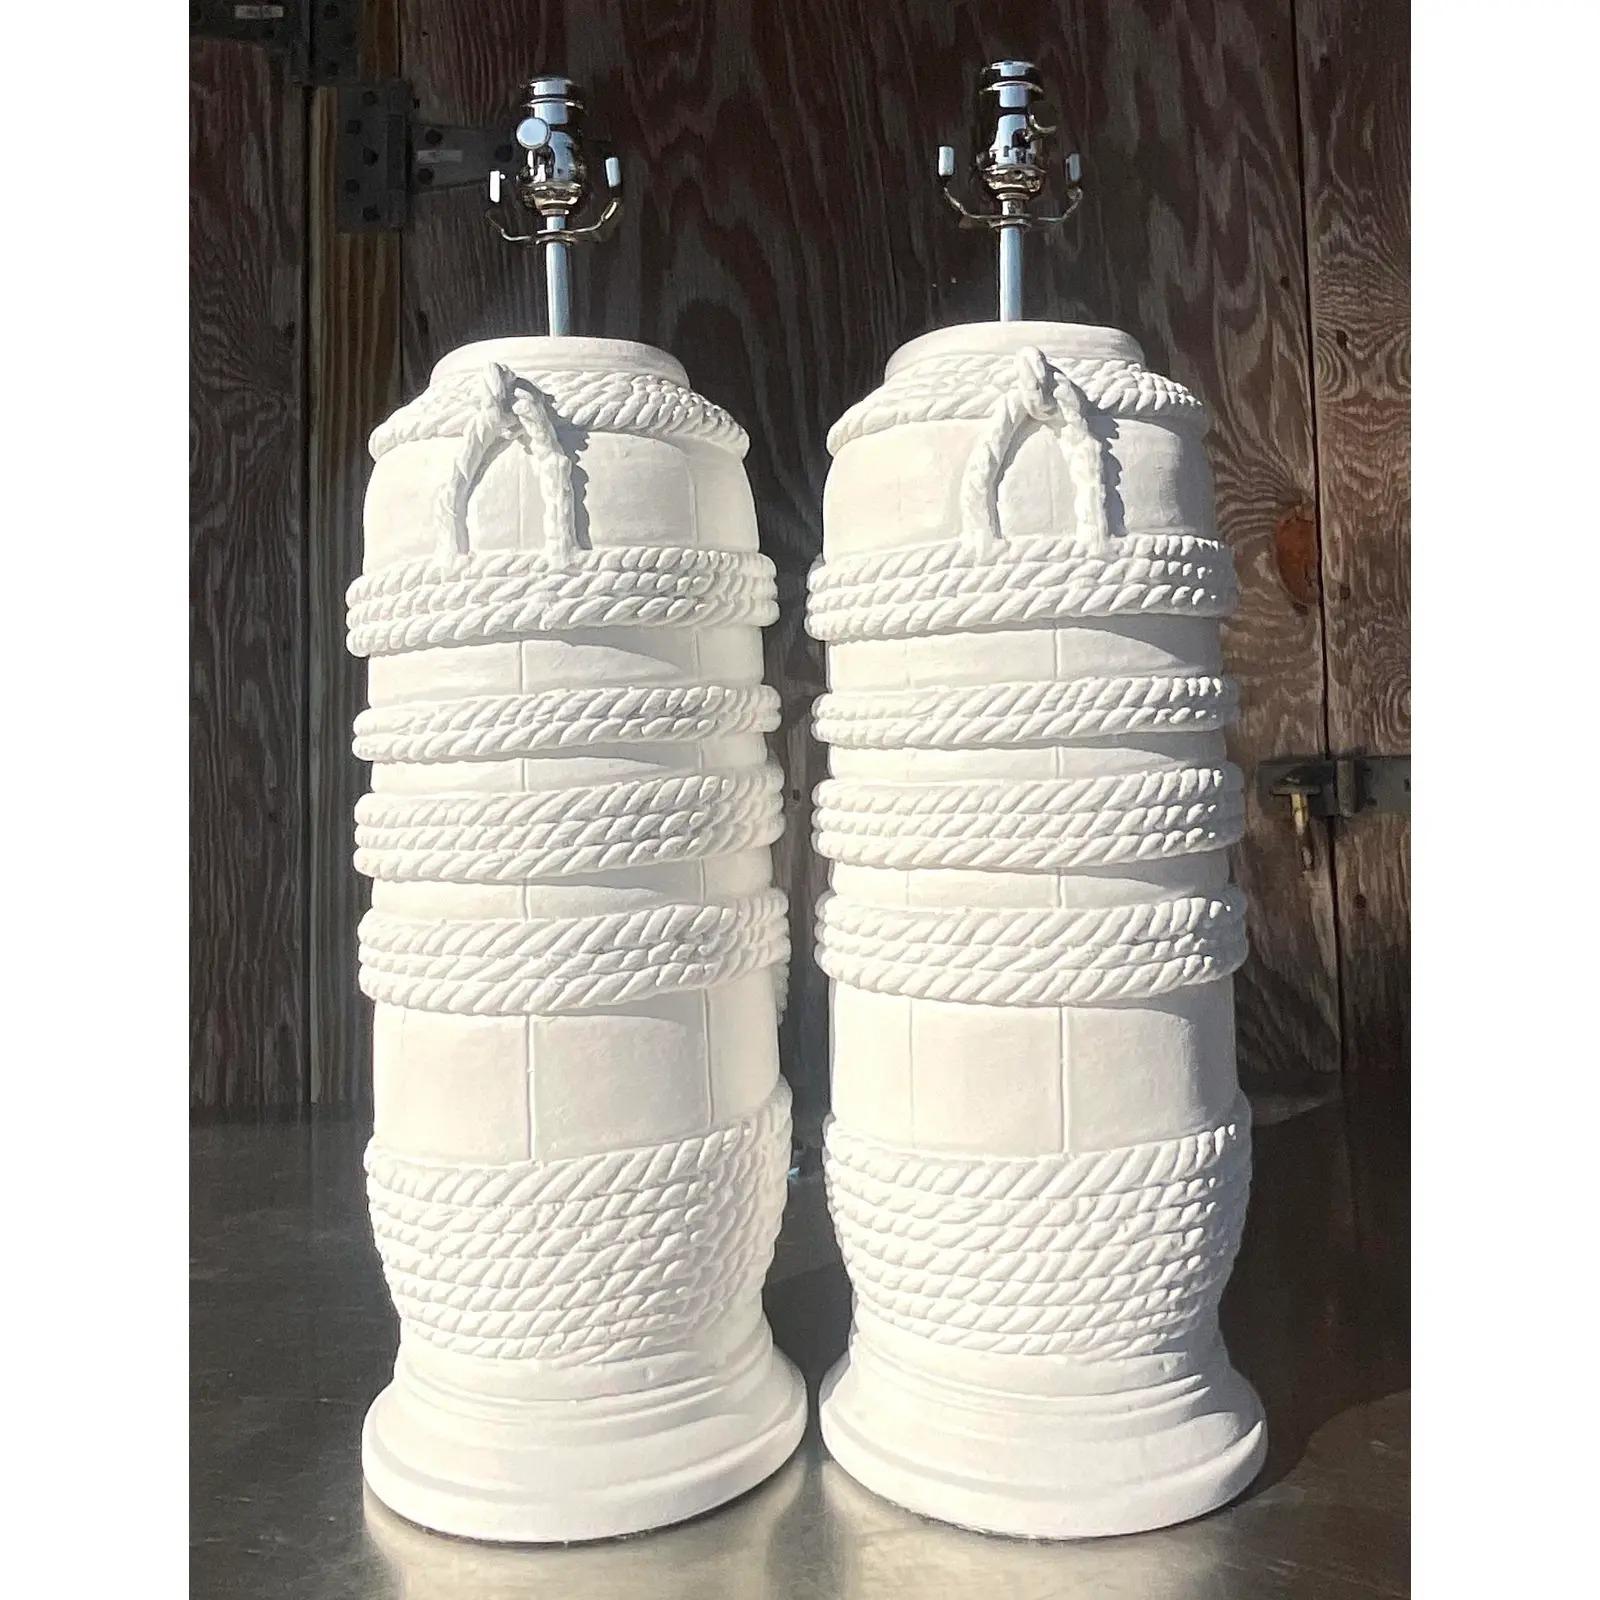 A fabulous vintage coastal pair of lamps. A chic plaster finish with a cool rope design. Fully restored with all new writing and hardware. Acquired from a Palm Beach estate.

The lamps are in great vintage condition. Minor scuffs and blemishes